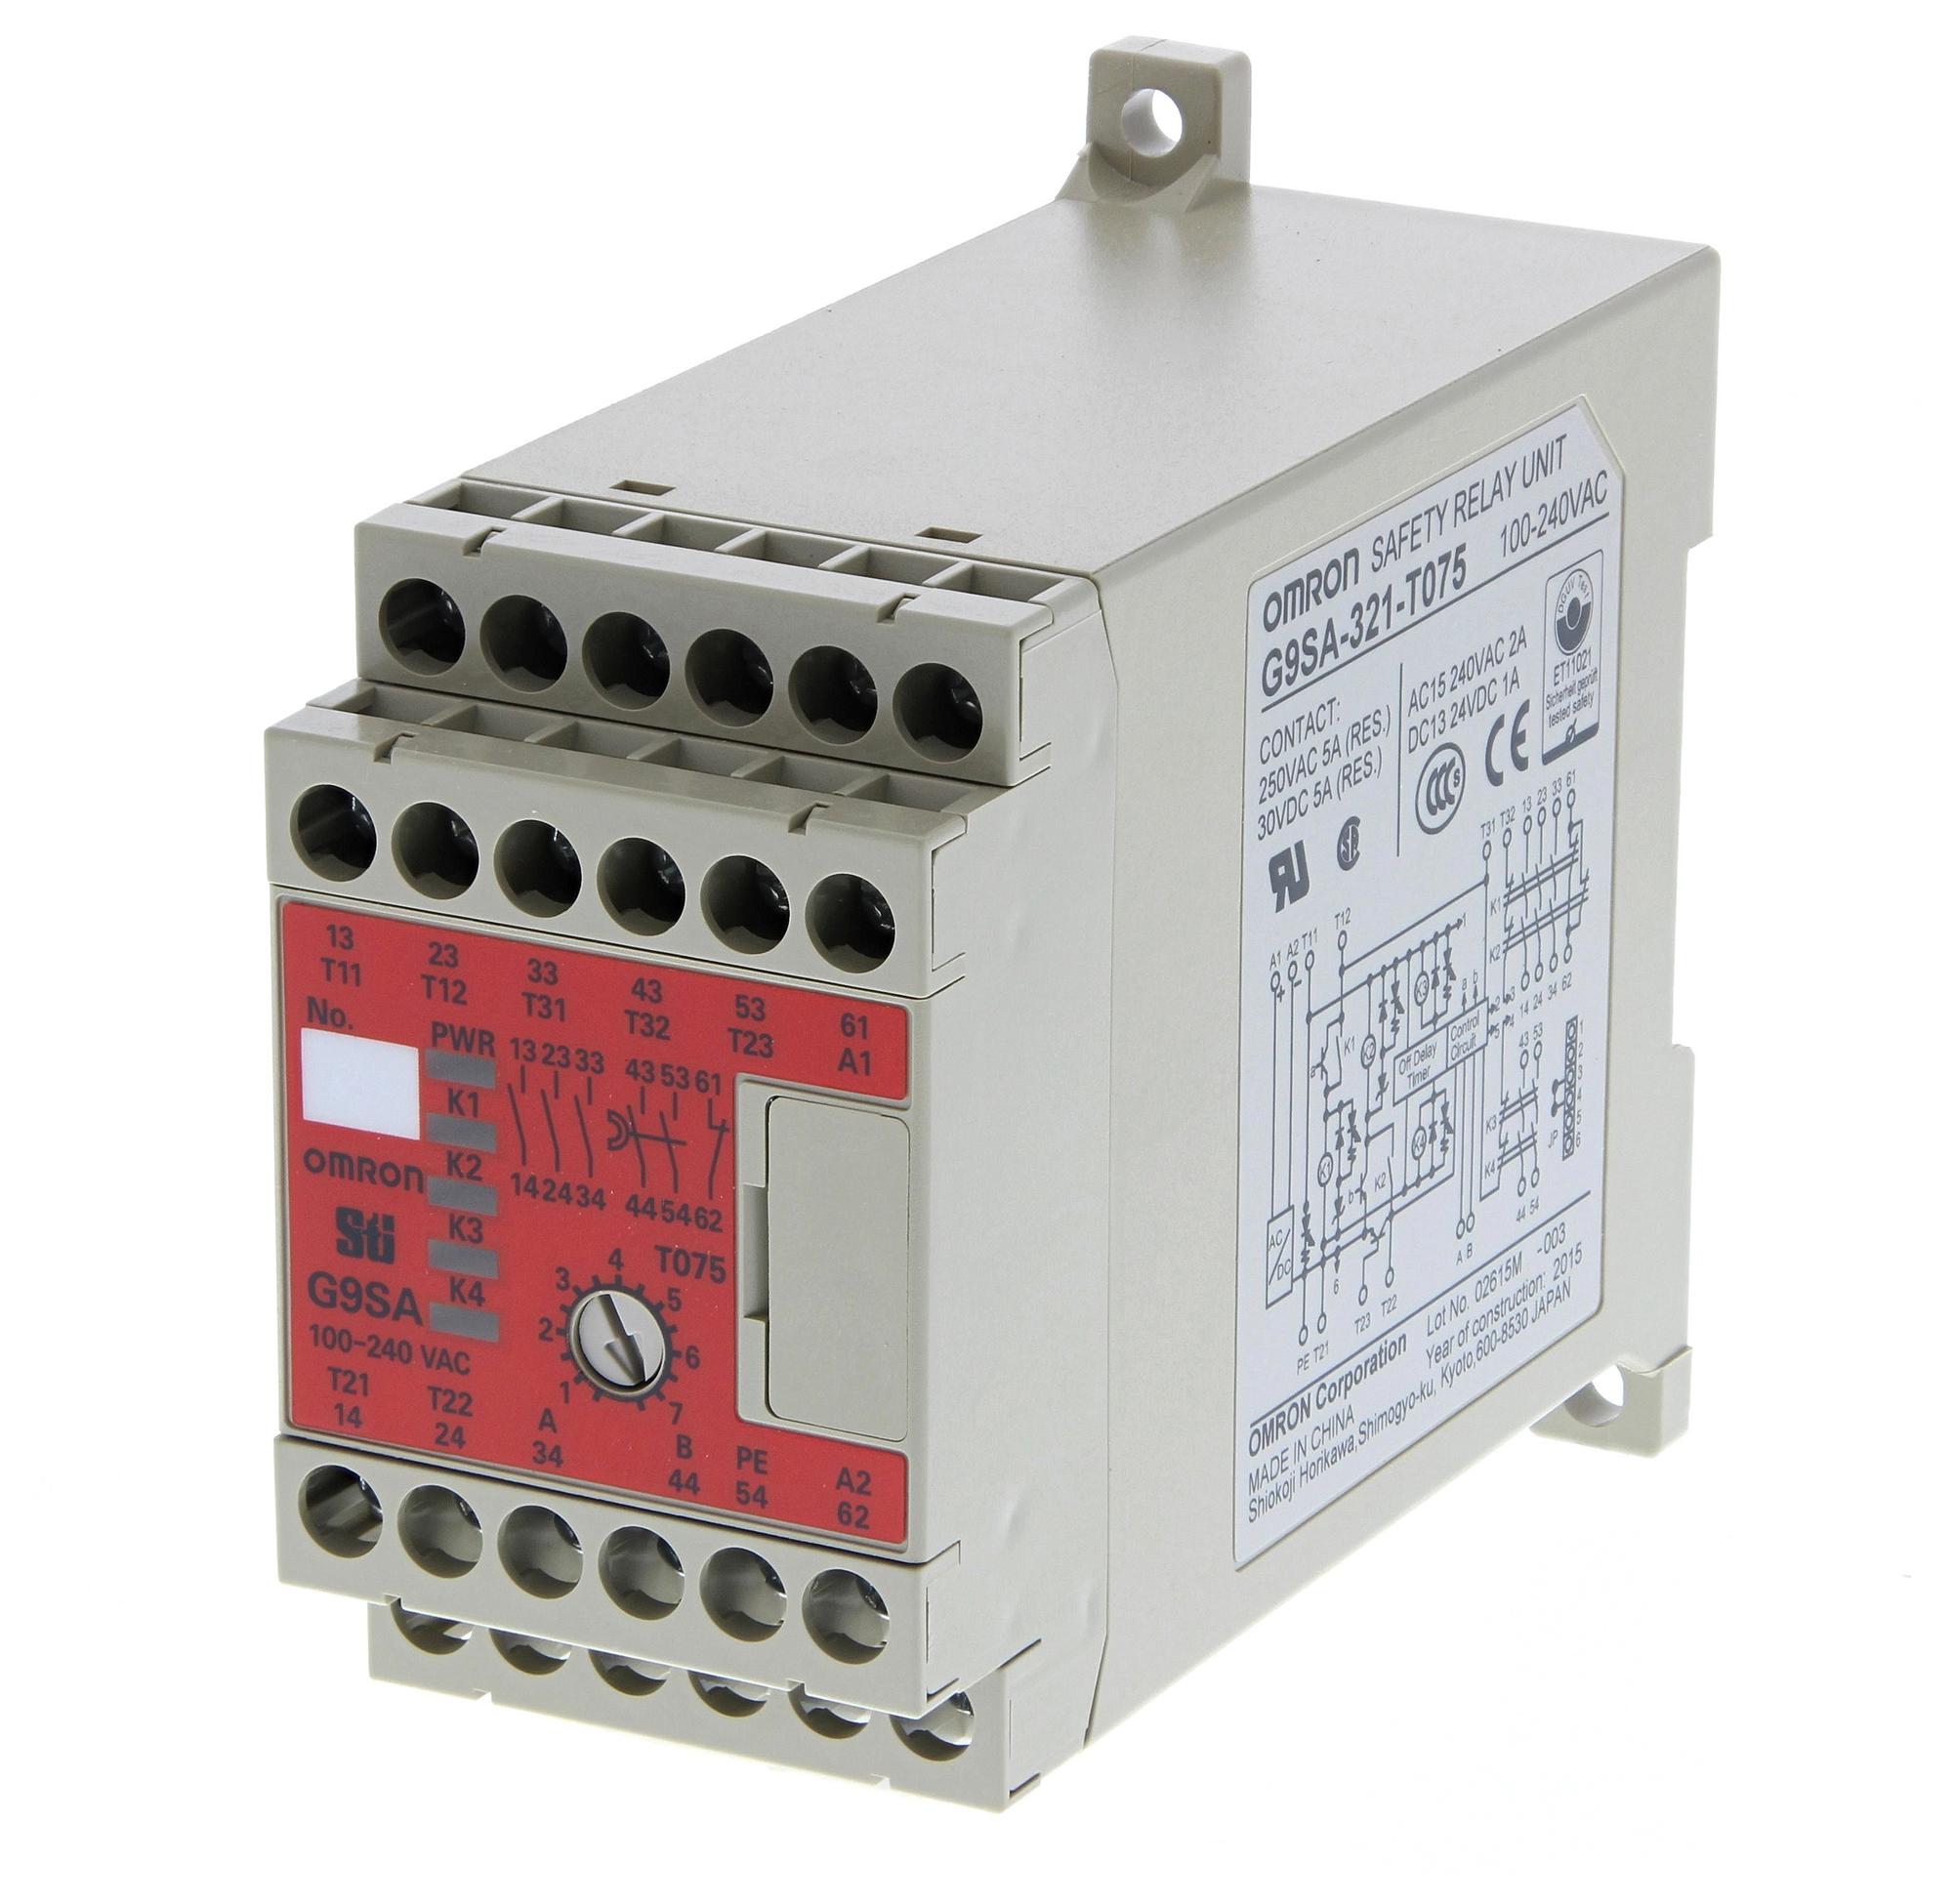 G9SA-321-T15 AC/DC24 SAFETY RELAYS OMRON